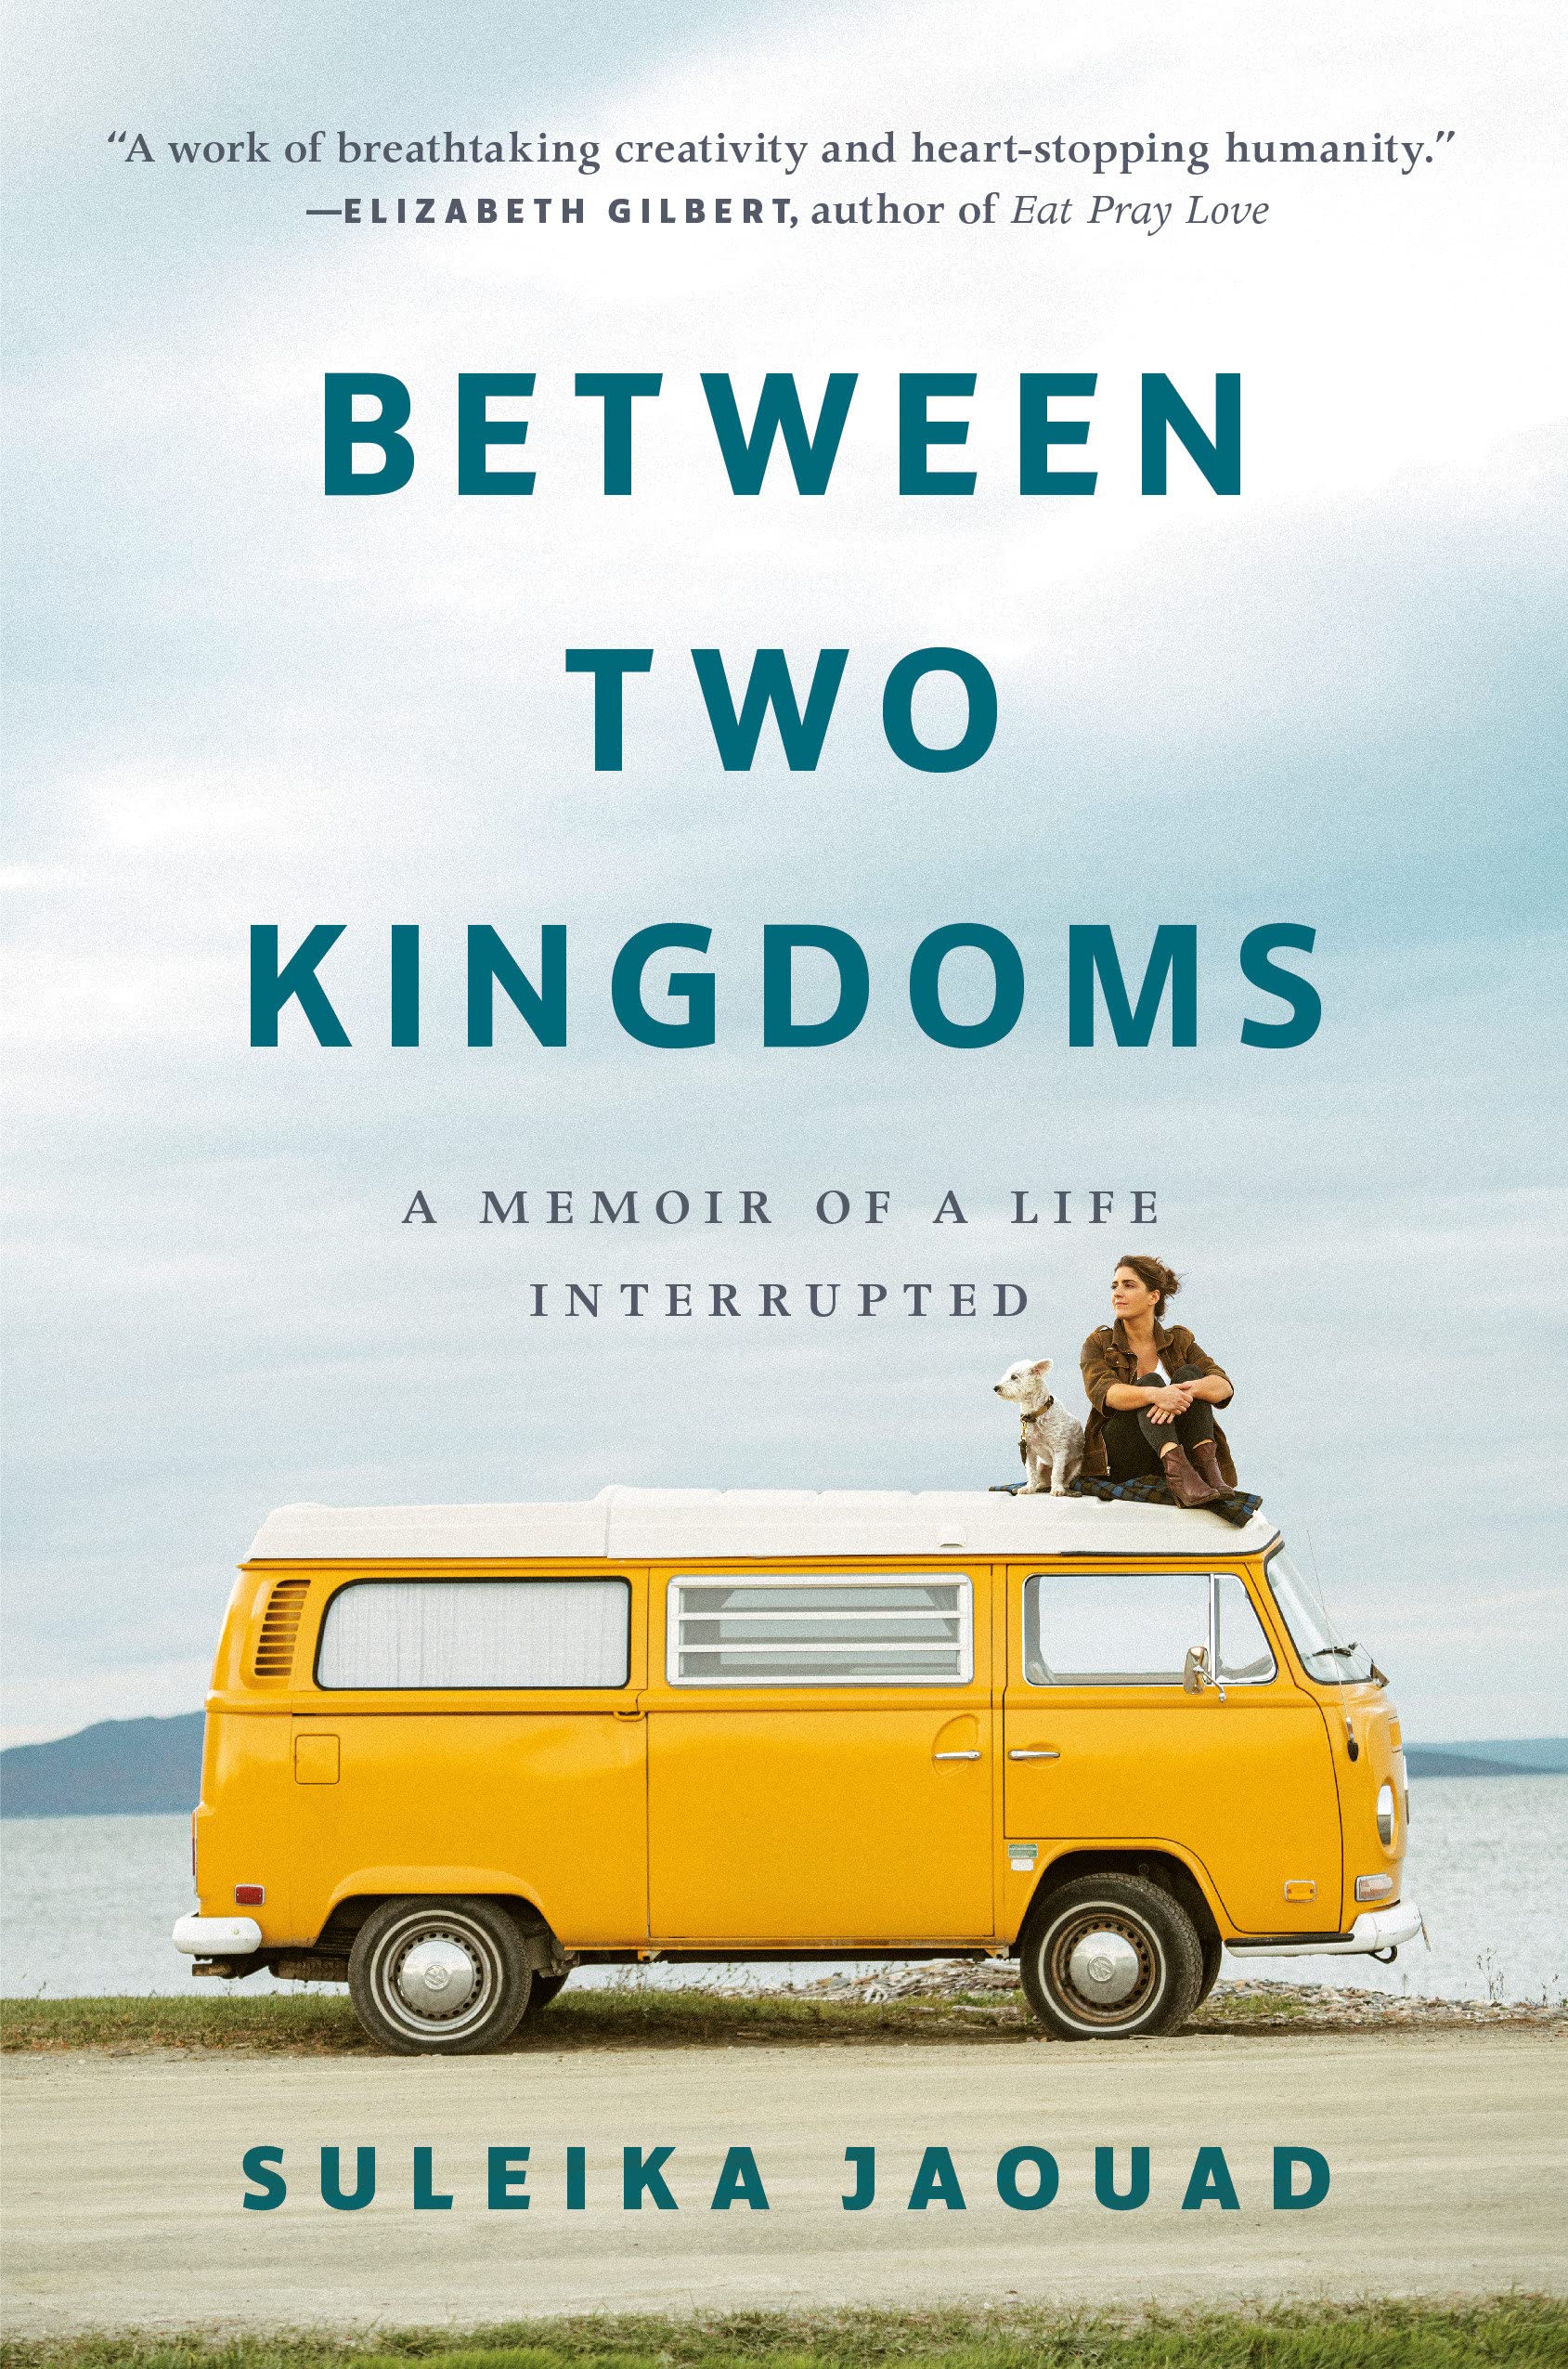 Between Two Kingdoms: A Memoir of a Life Interrupted Paperback by Suleika Jaouad